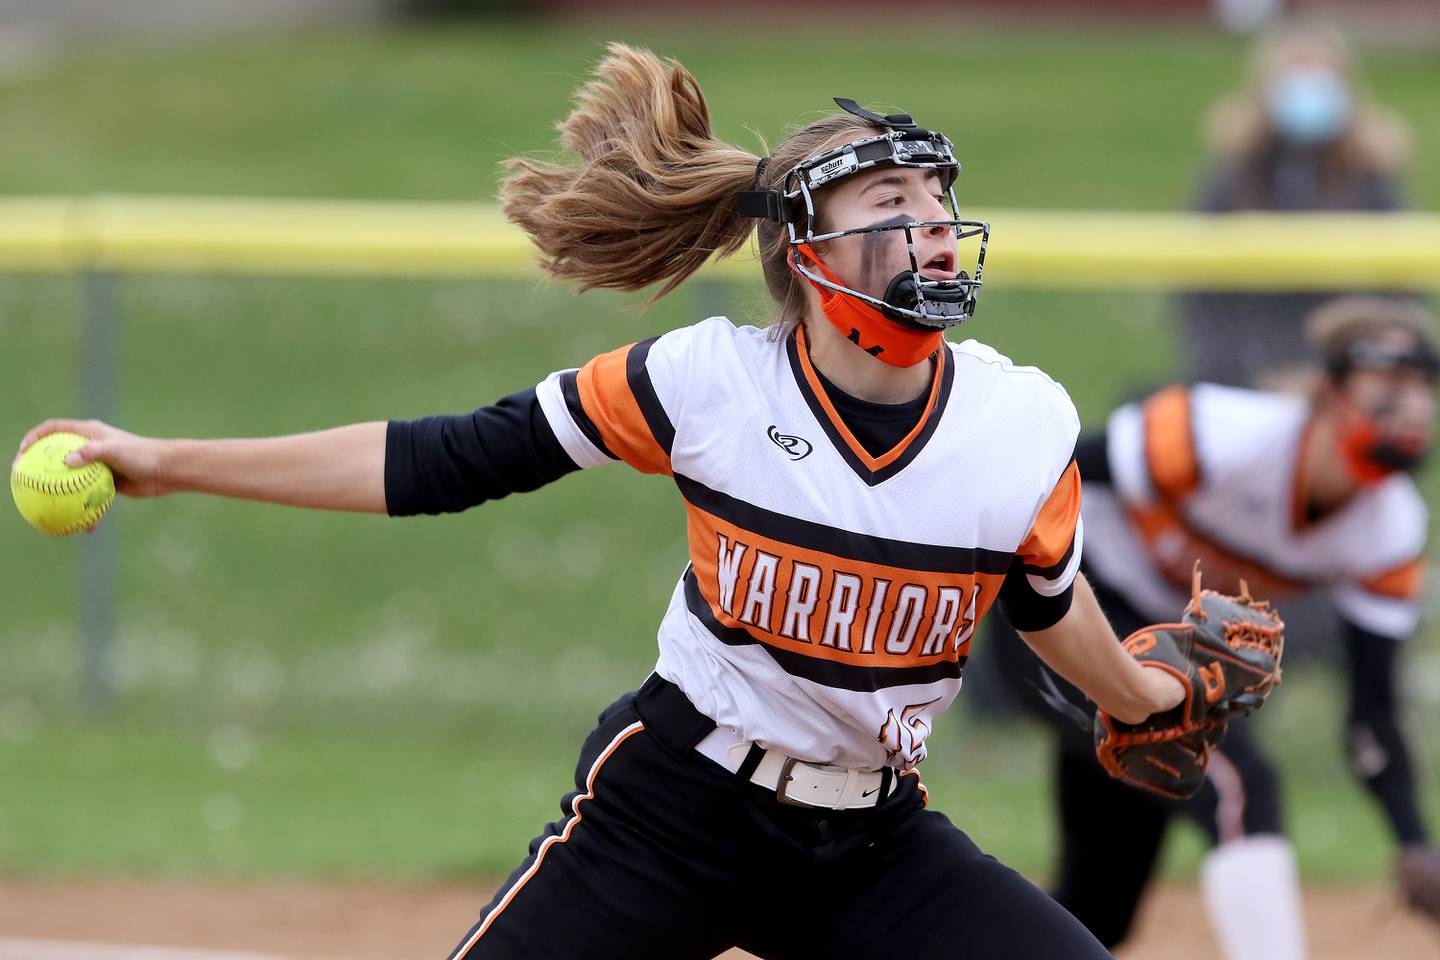 McHenry pitcher Channing Keppy delivers the pitch to Crystal Lake South during their softball game at McHenry High School on Tuesday, May 4, 2021 in McHenry.